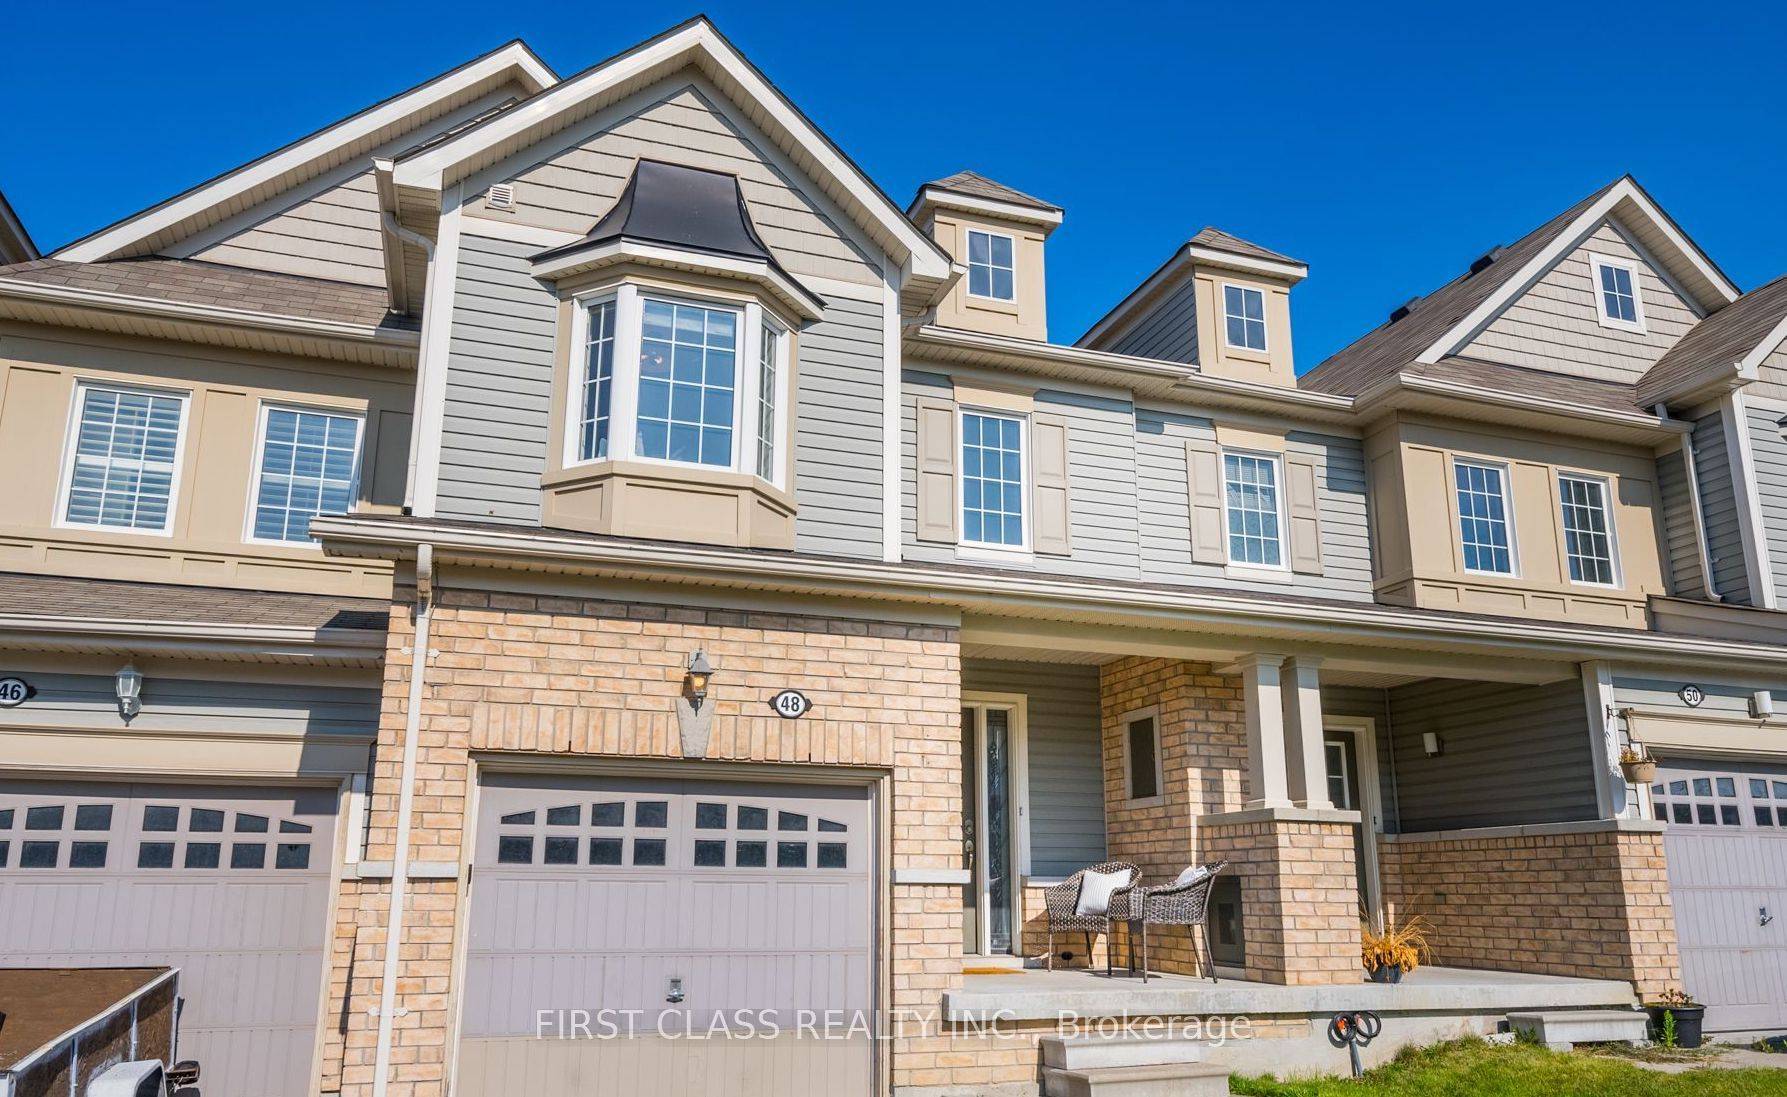 Rarely offered a spacious two floor townhome in the heart of the Blue Grass Meadows community.